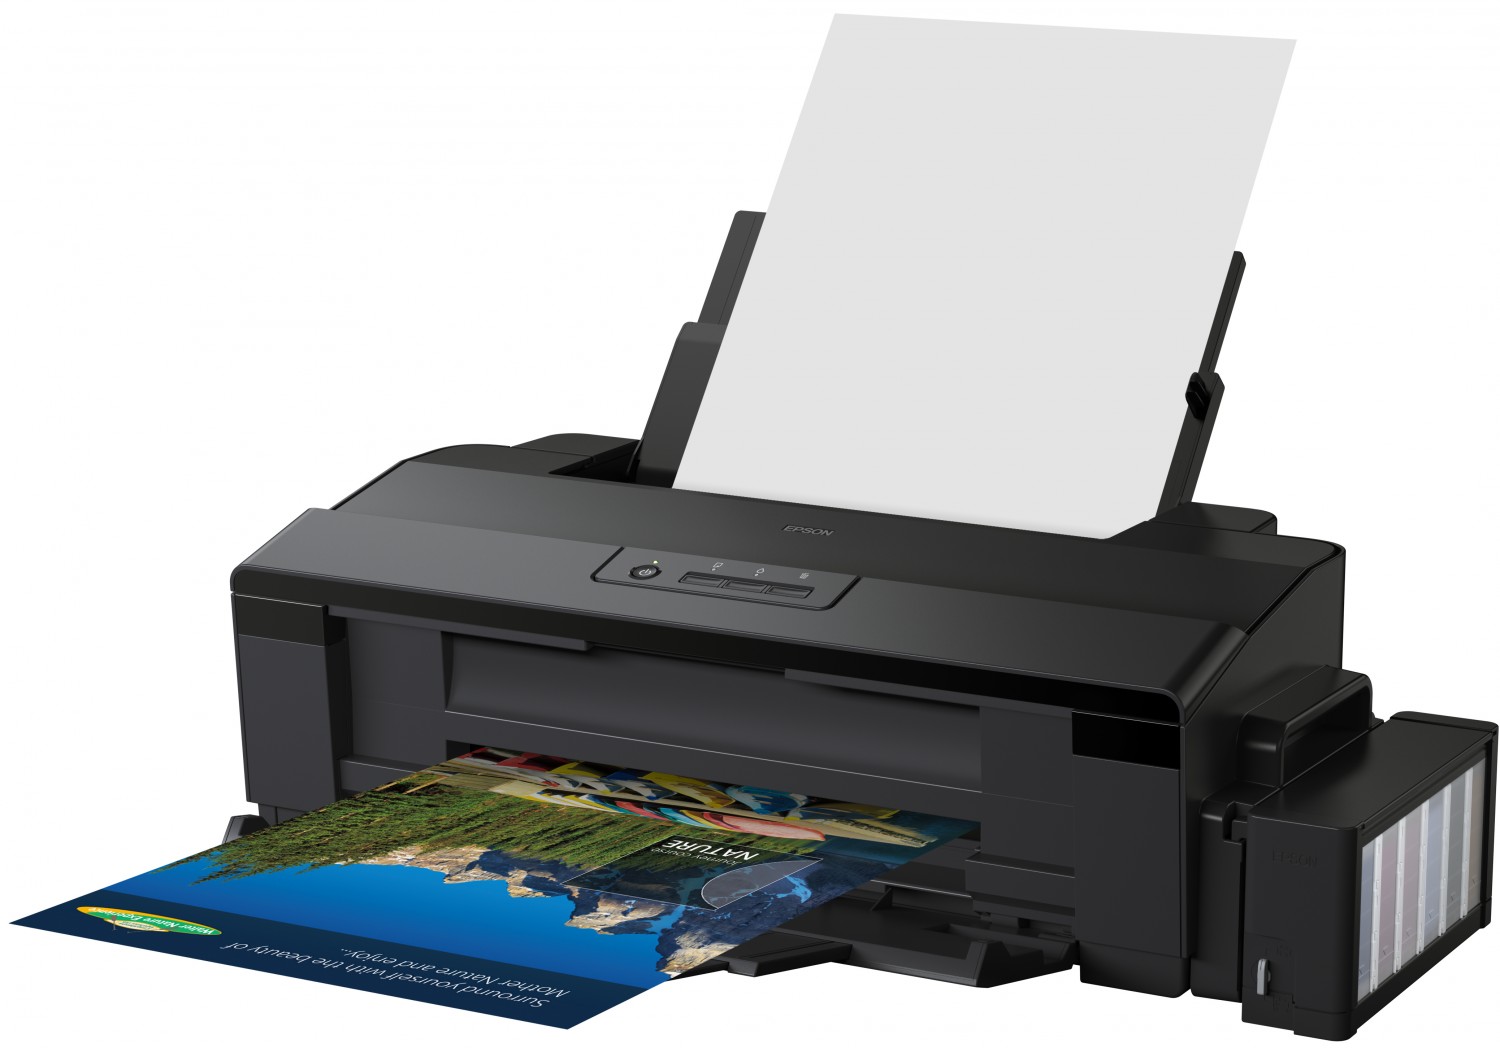 Printer Epson L1800 Ubuntu How to Download and Install - Featured